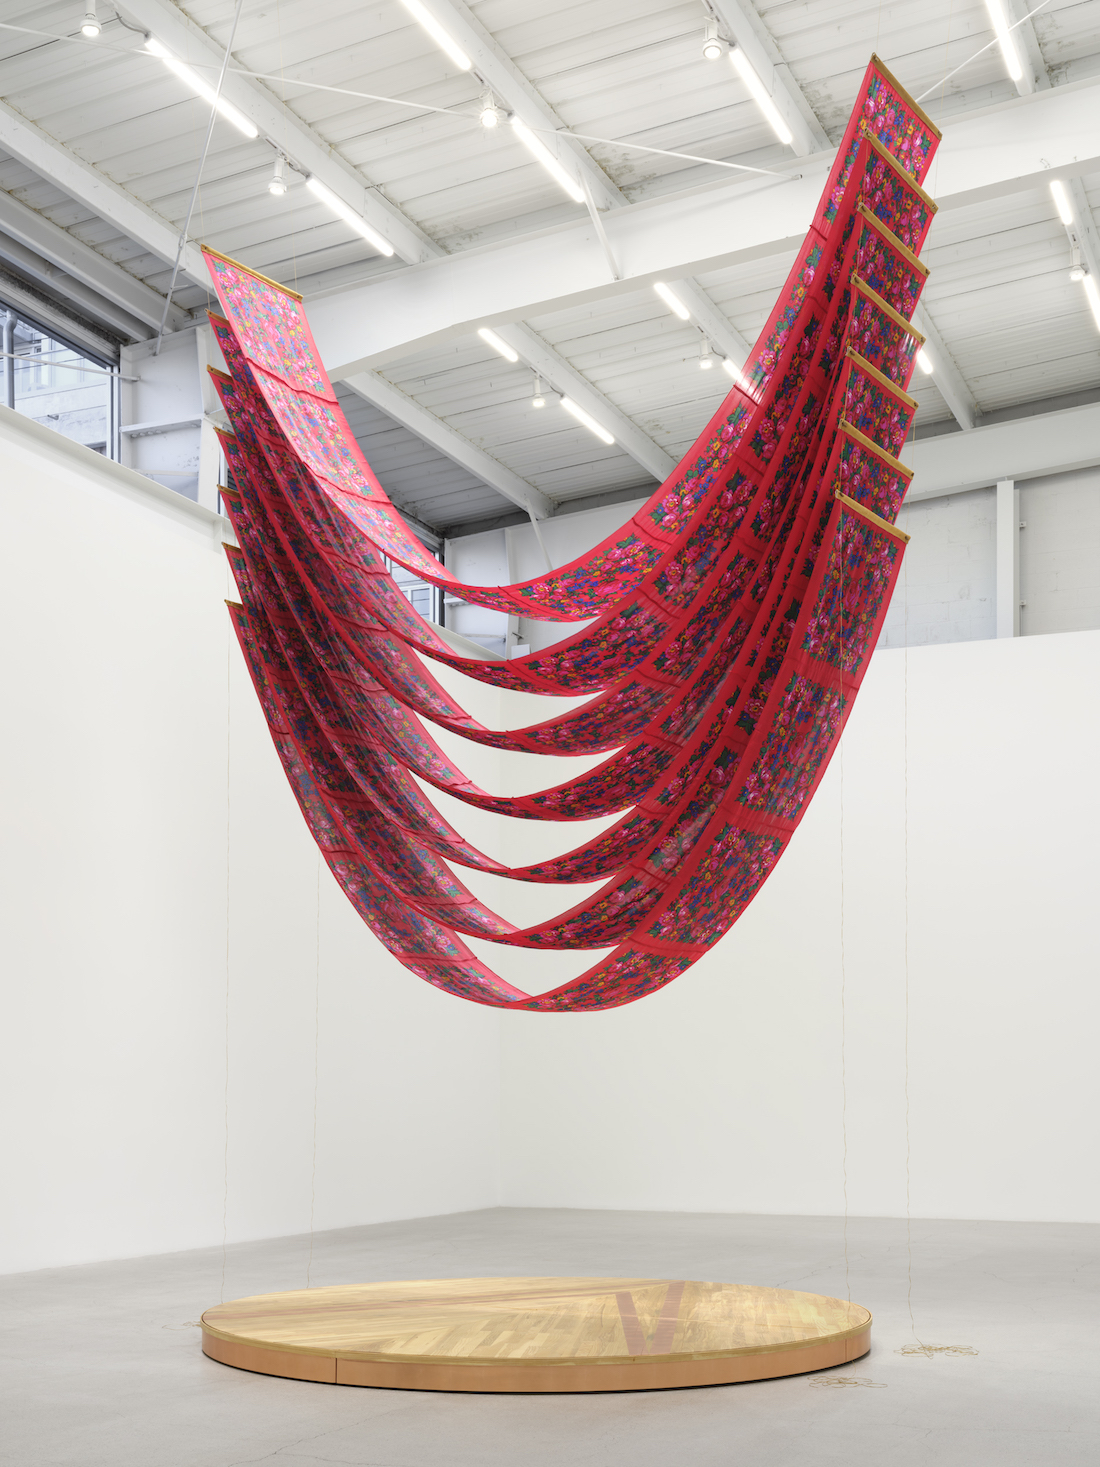 A gallery installation of long, narrow bands of printed red fabric hung by both ends in a dangling u-shape over a round wooden platform.